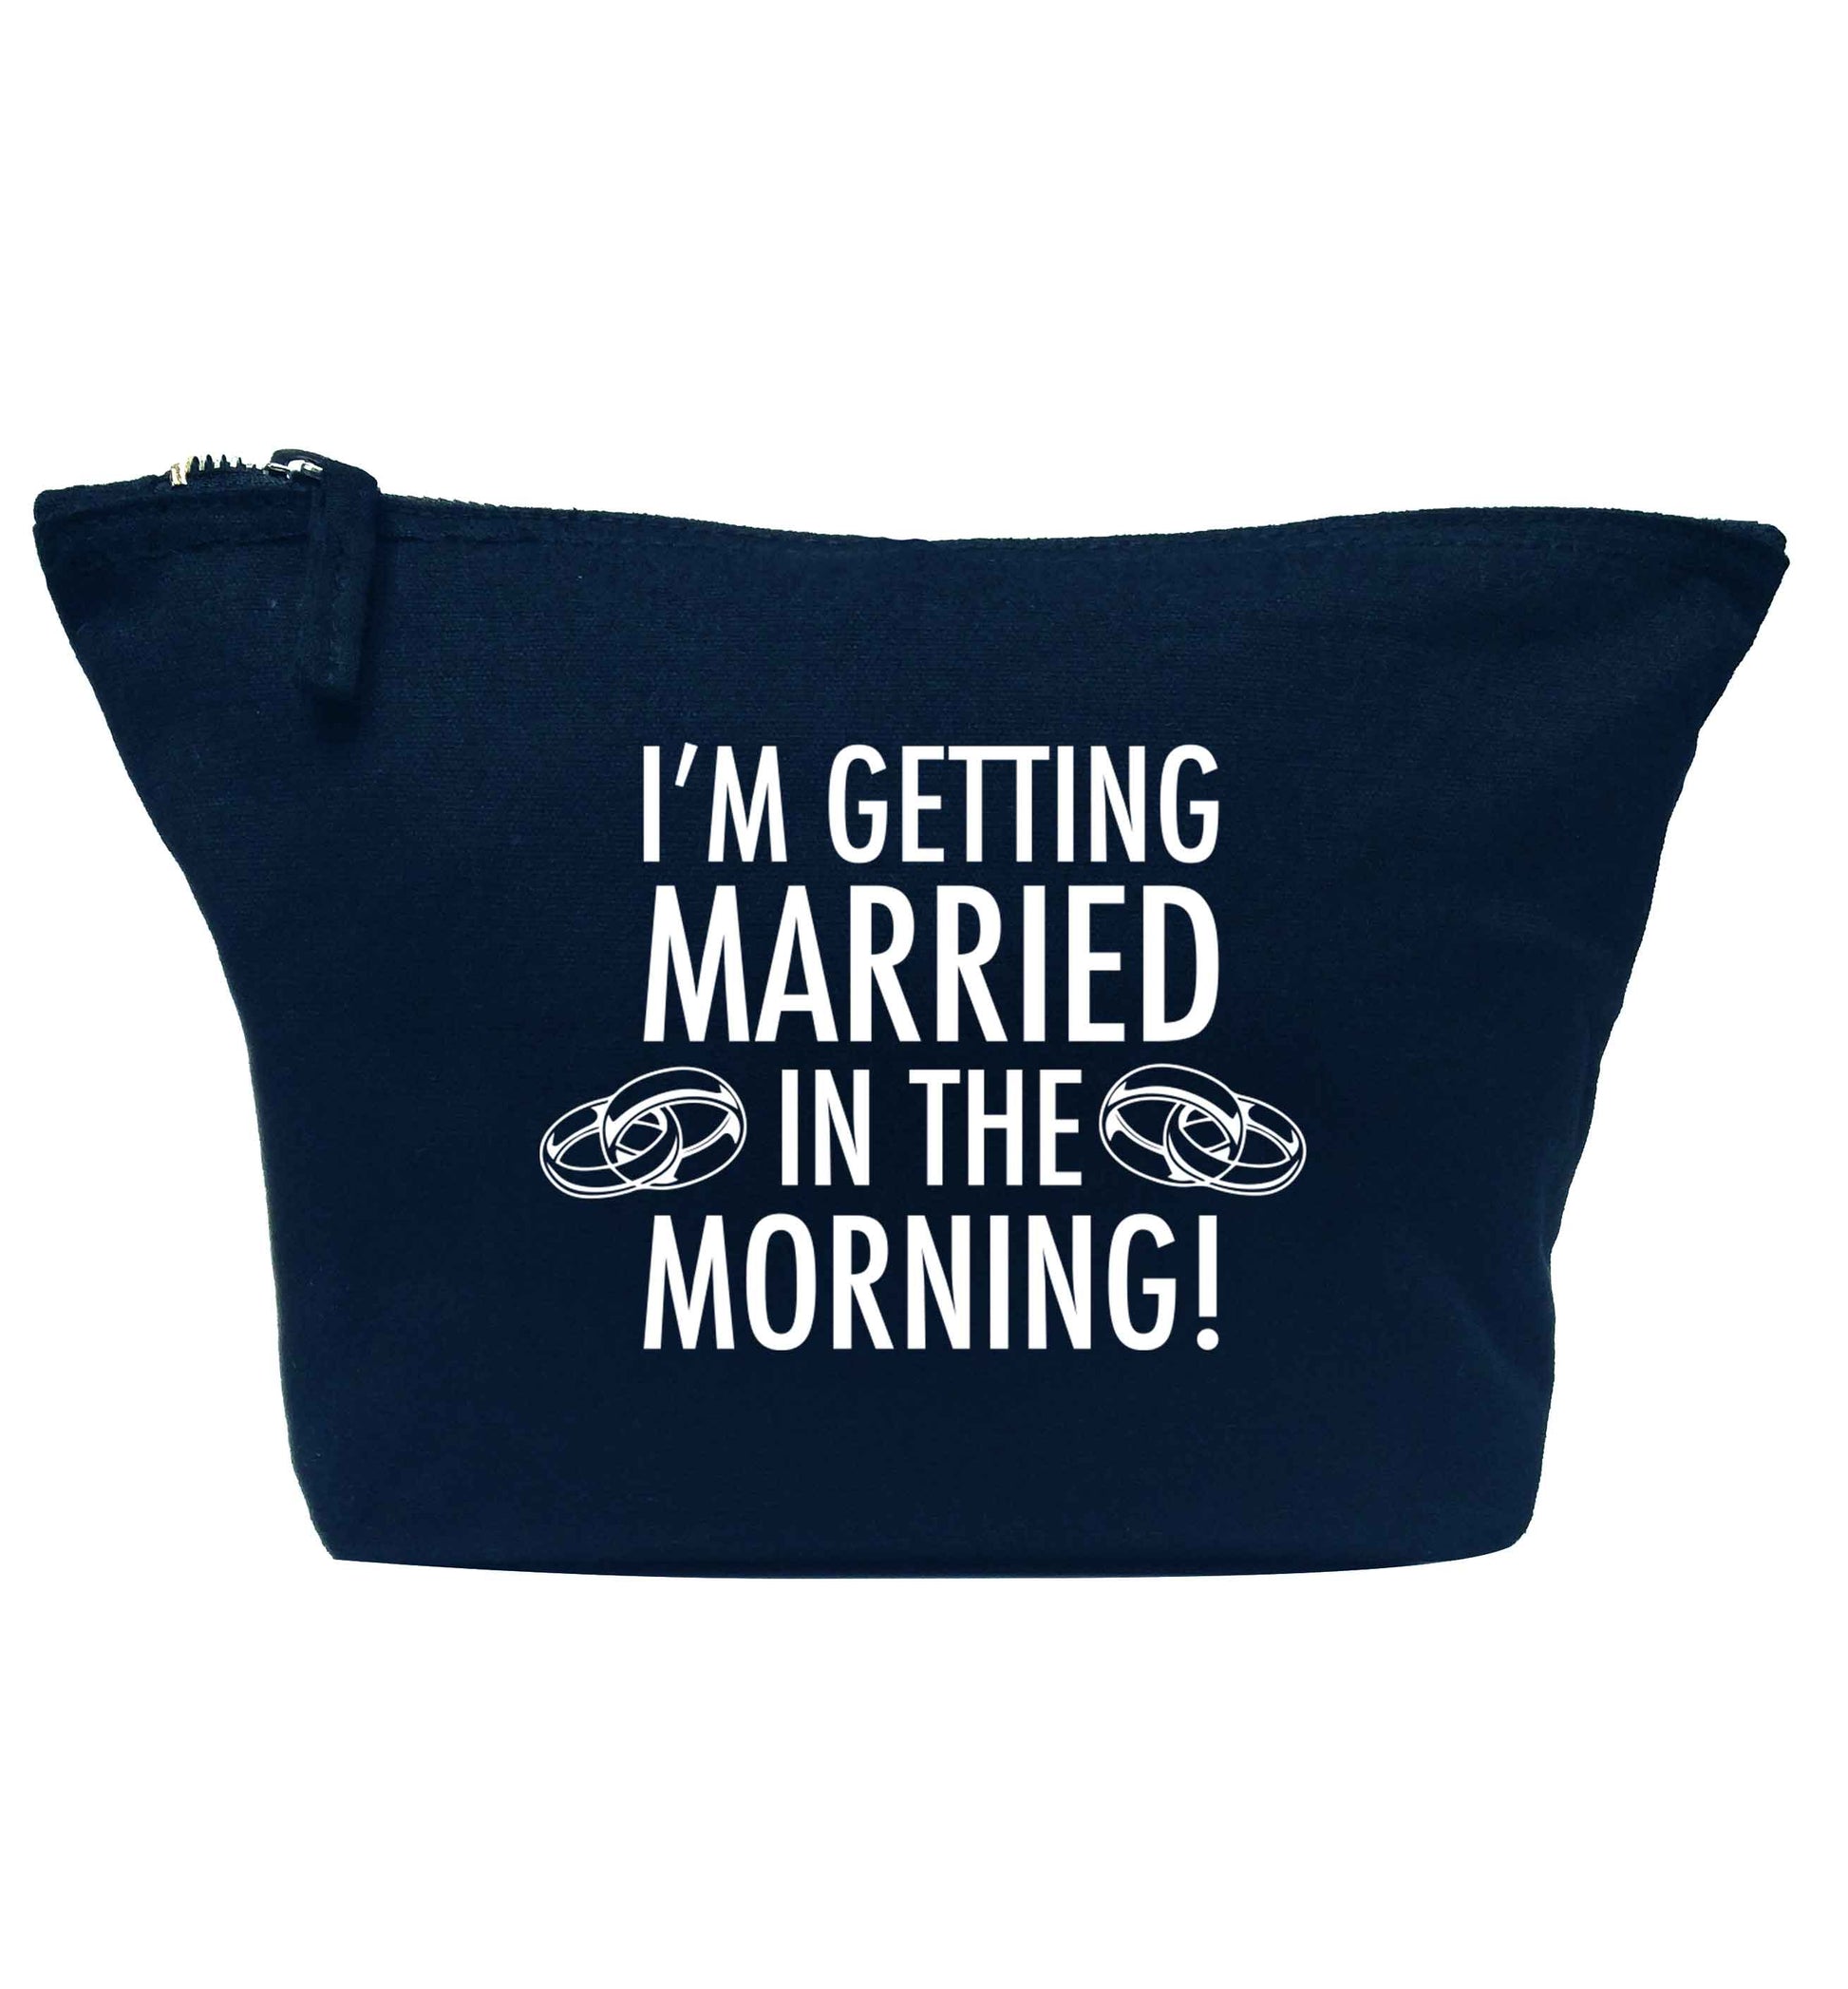 I'm getting married in the morning! navy makeup bag